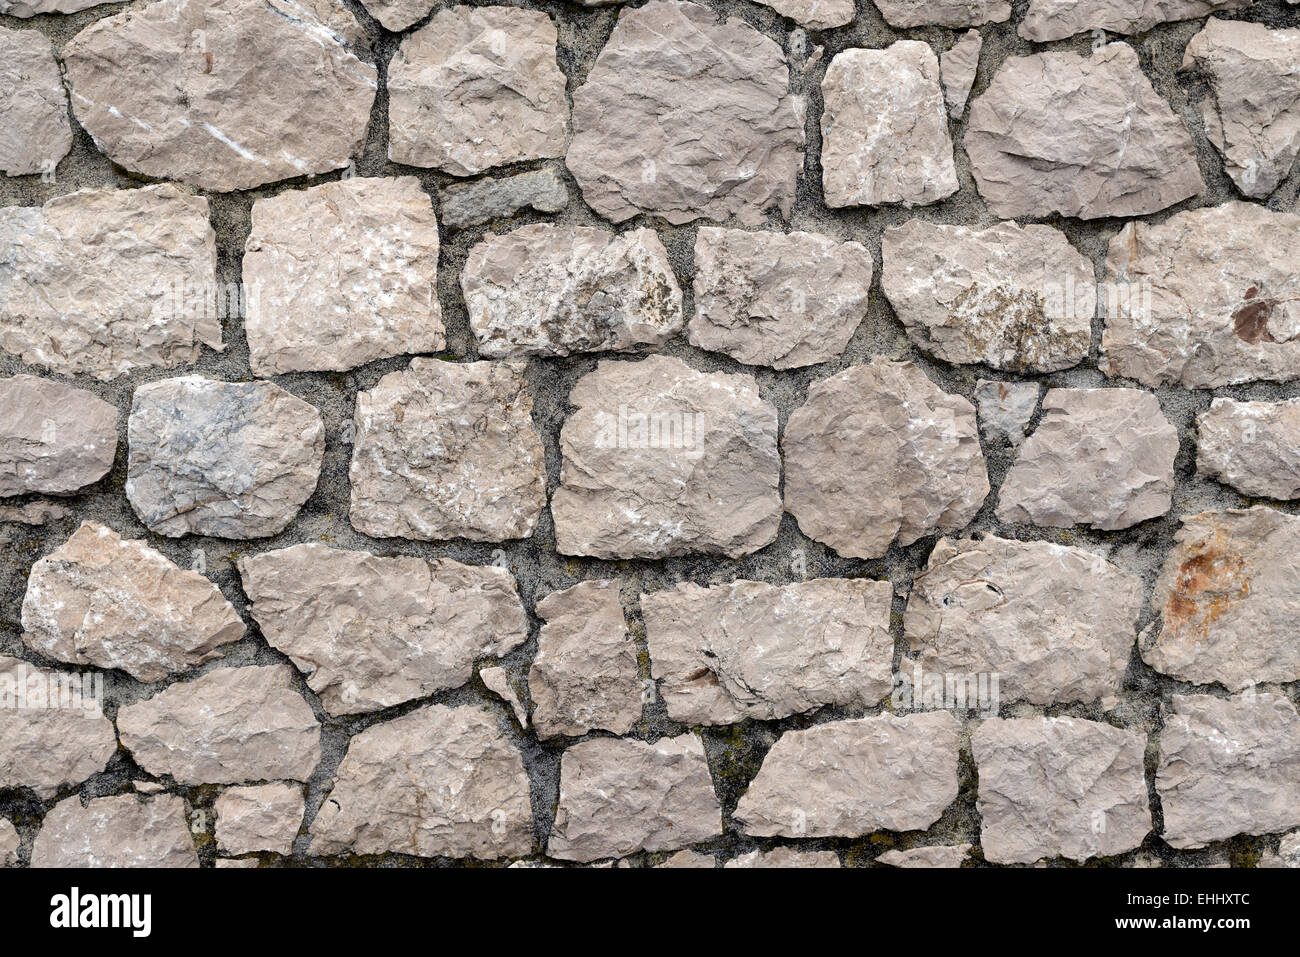 Background - Stacked Stone Wall. Stock Photo